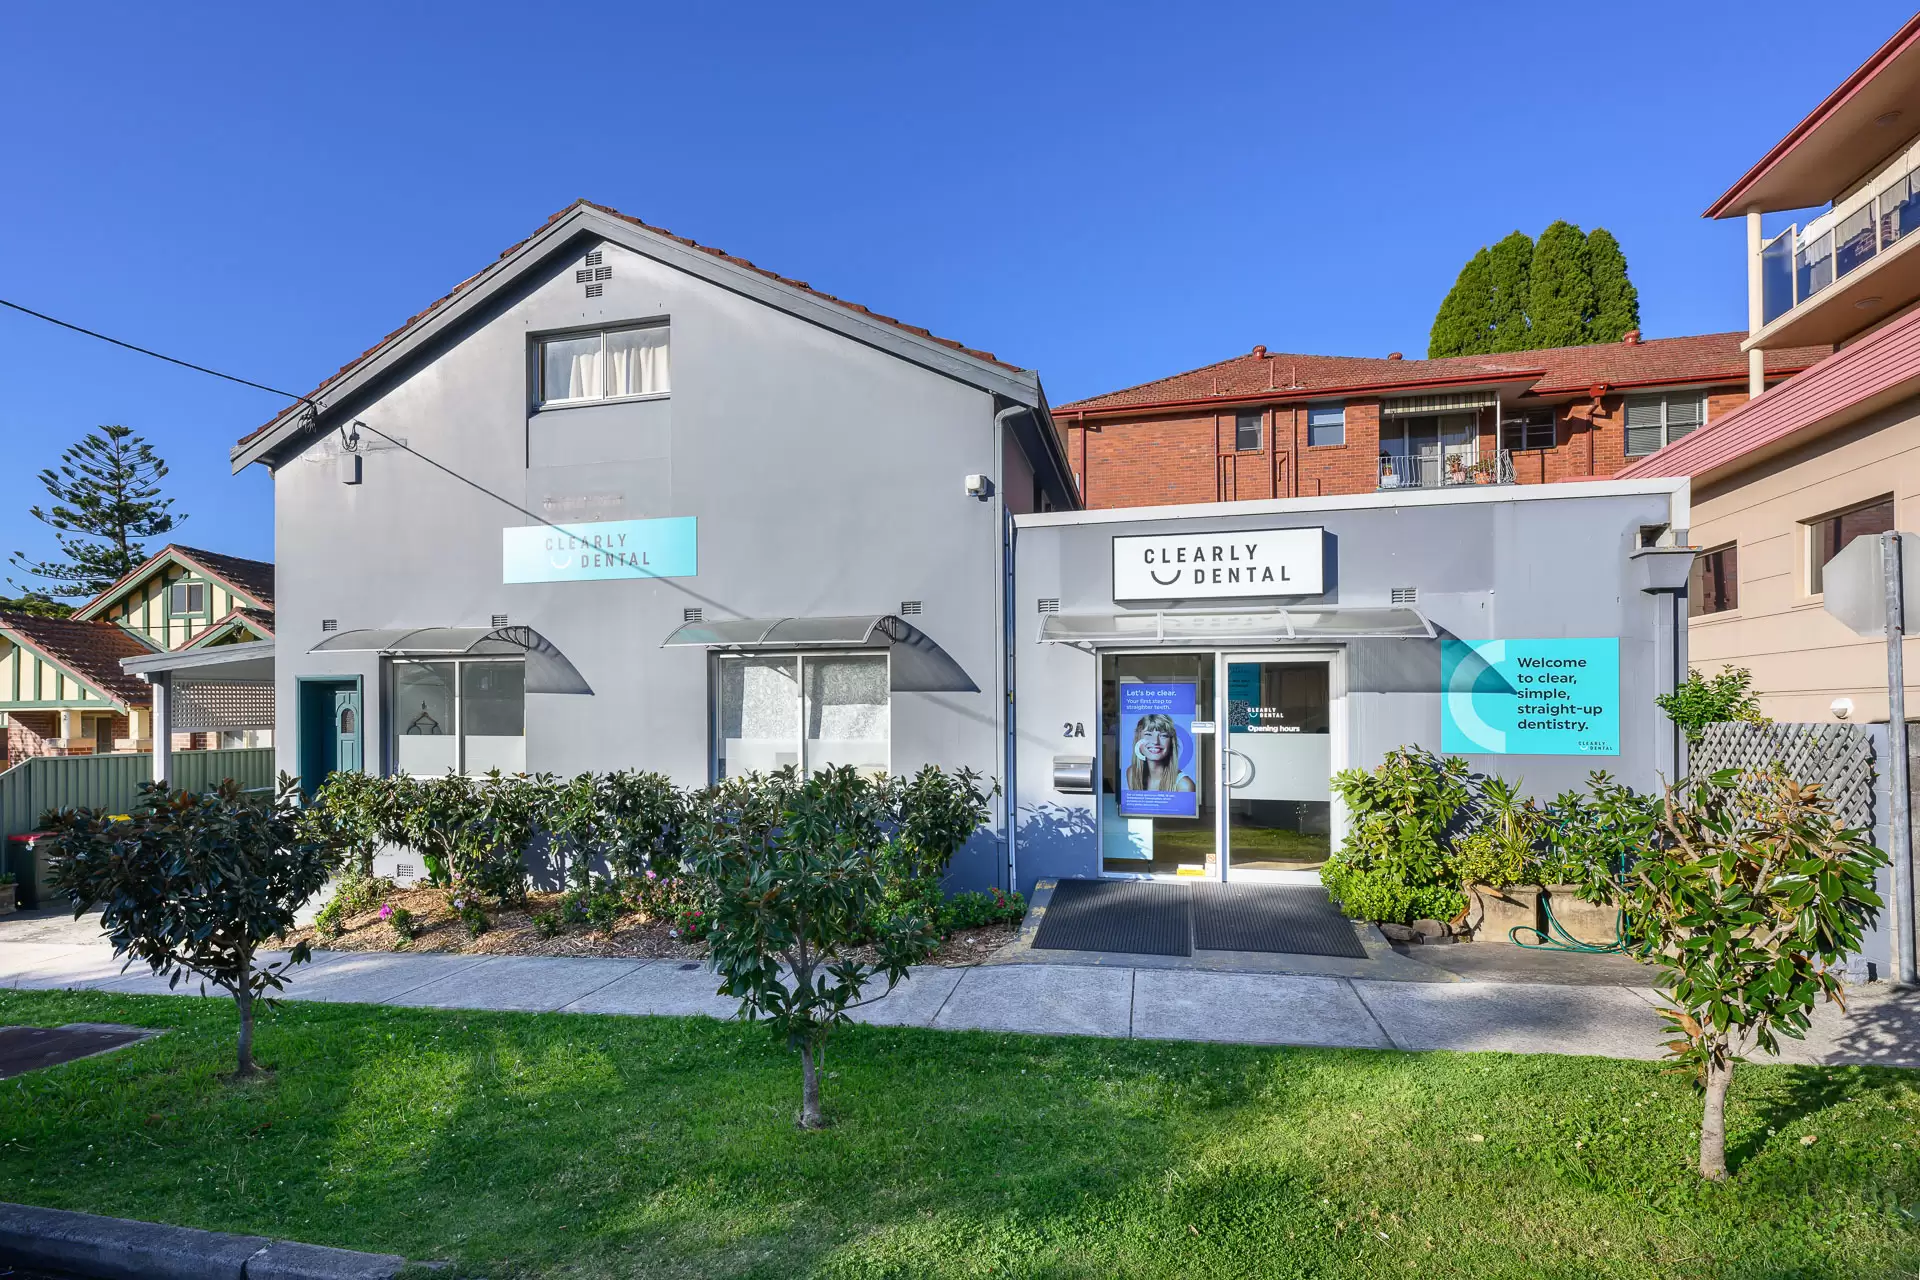 2 A Blakesley Street, Chatswood Sold by Shead Property - image 1